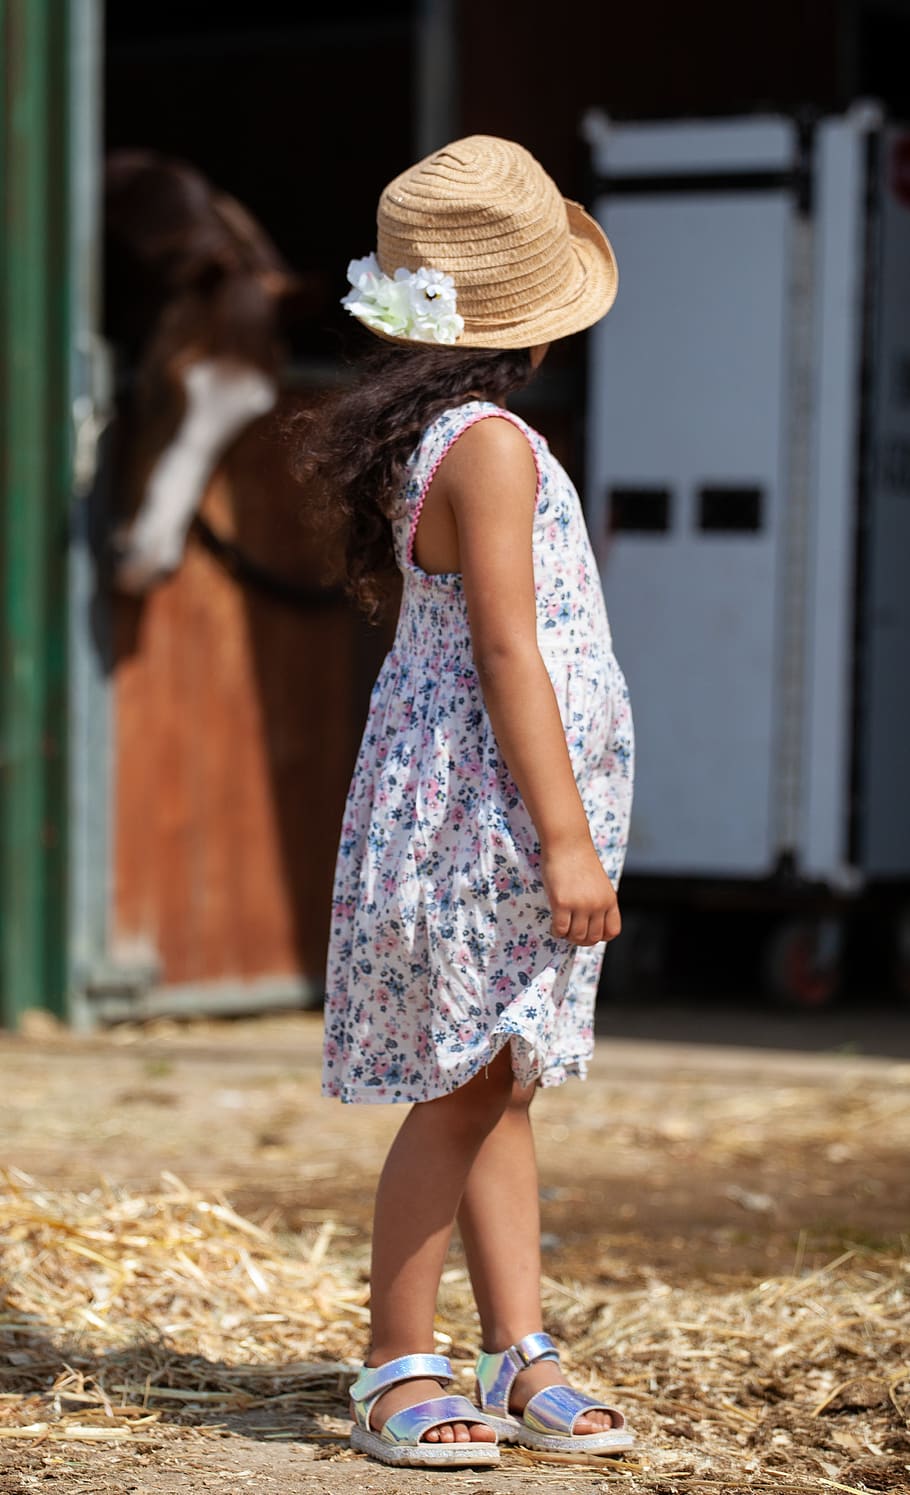 child in stable, horse, child in hat, child, hat, portrait, girl, childhood, person, summer